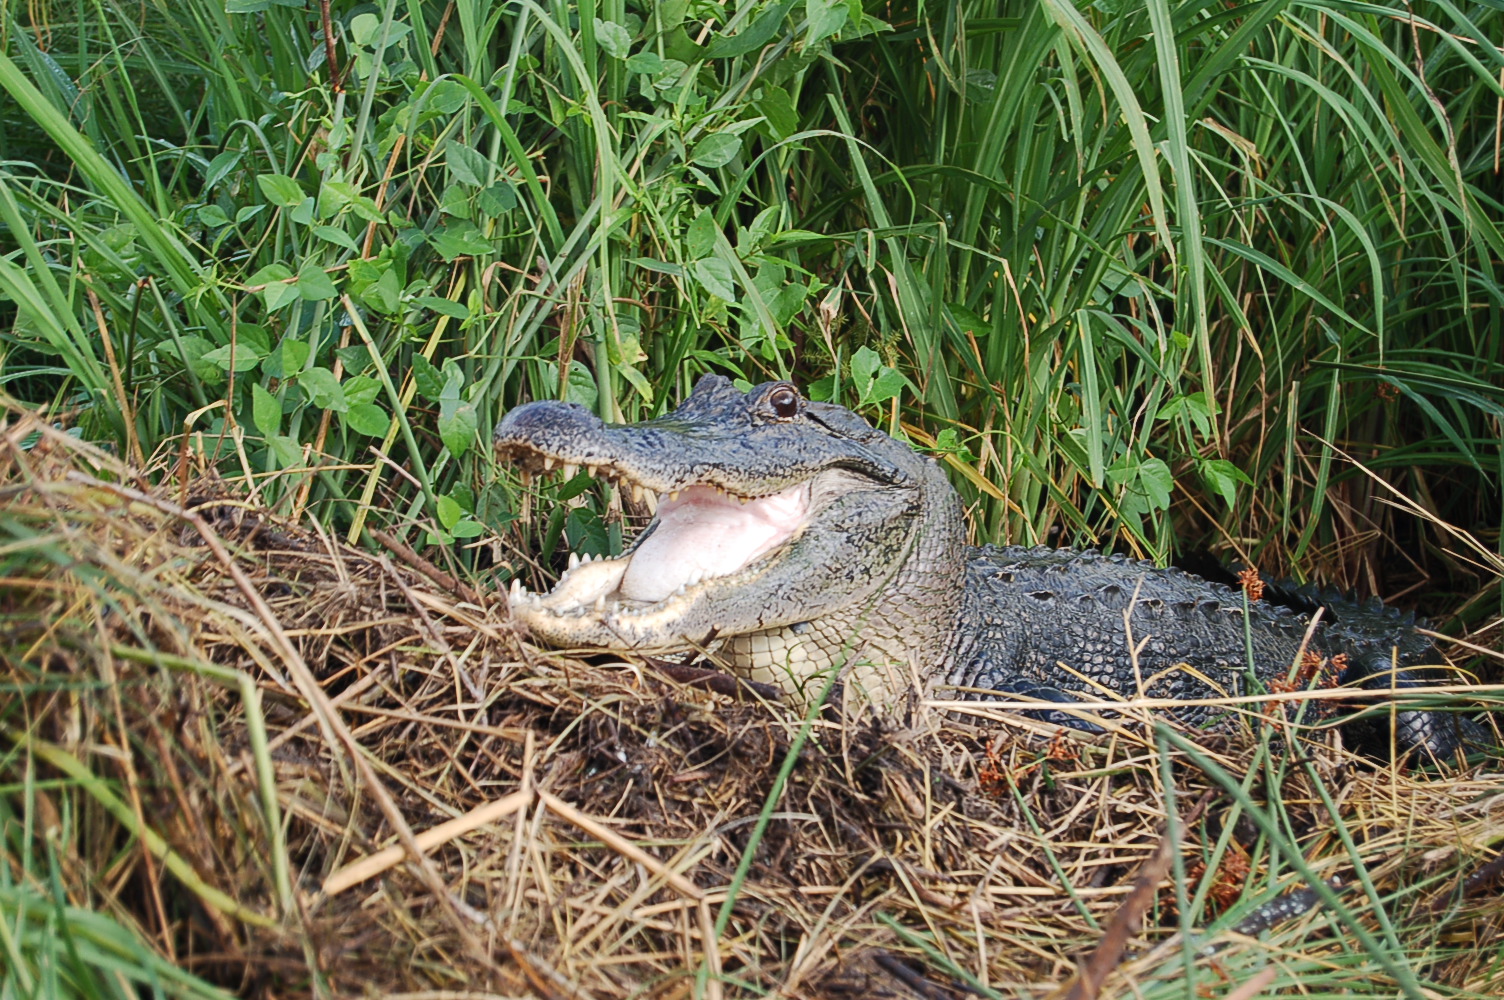 American alligators like this one are able to digest large meals because they can divert blood flow from their lungs to their stomach, which increases acid production, according to a new study by University of Utah biologist C.G. Farmer.